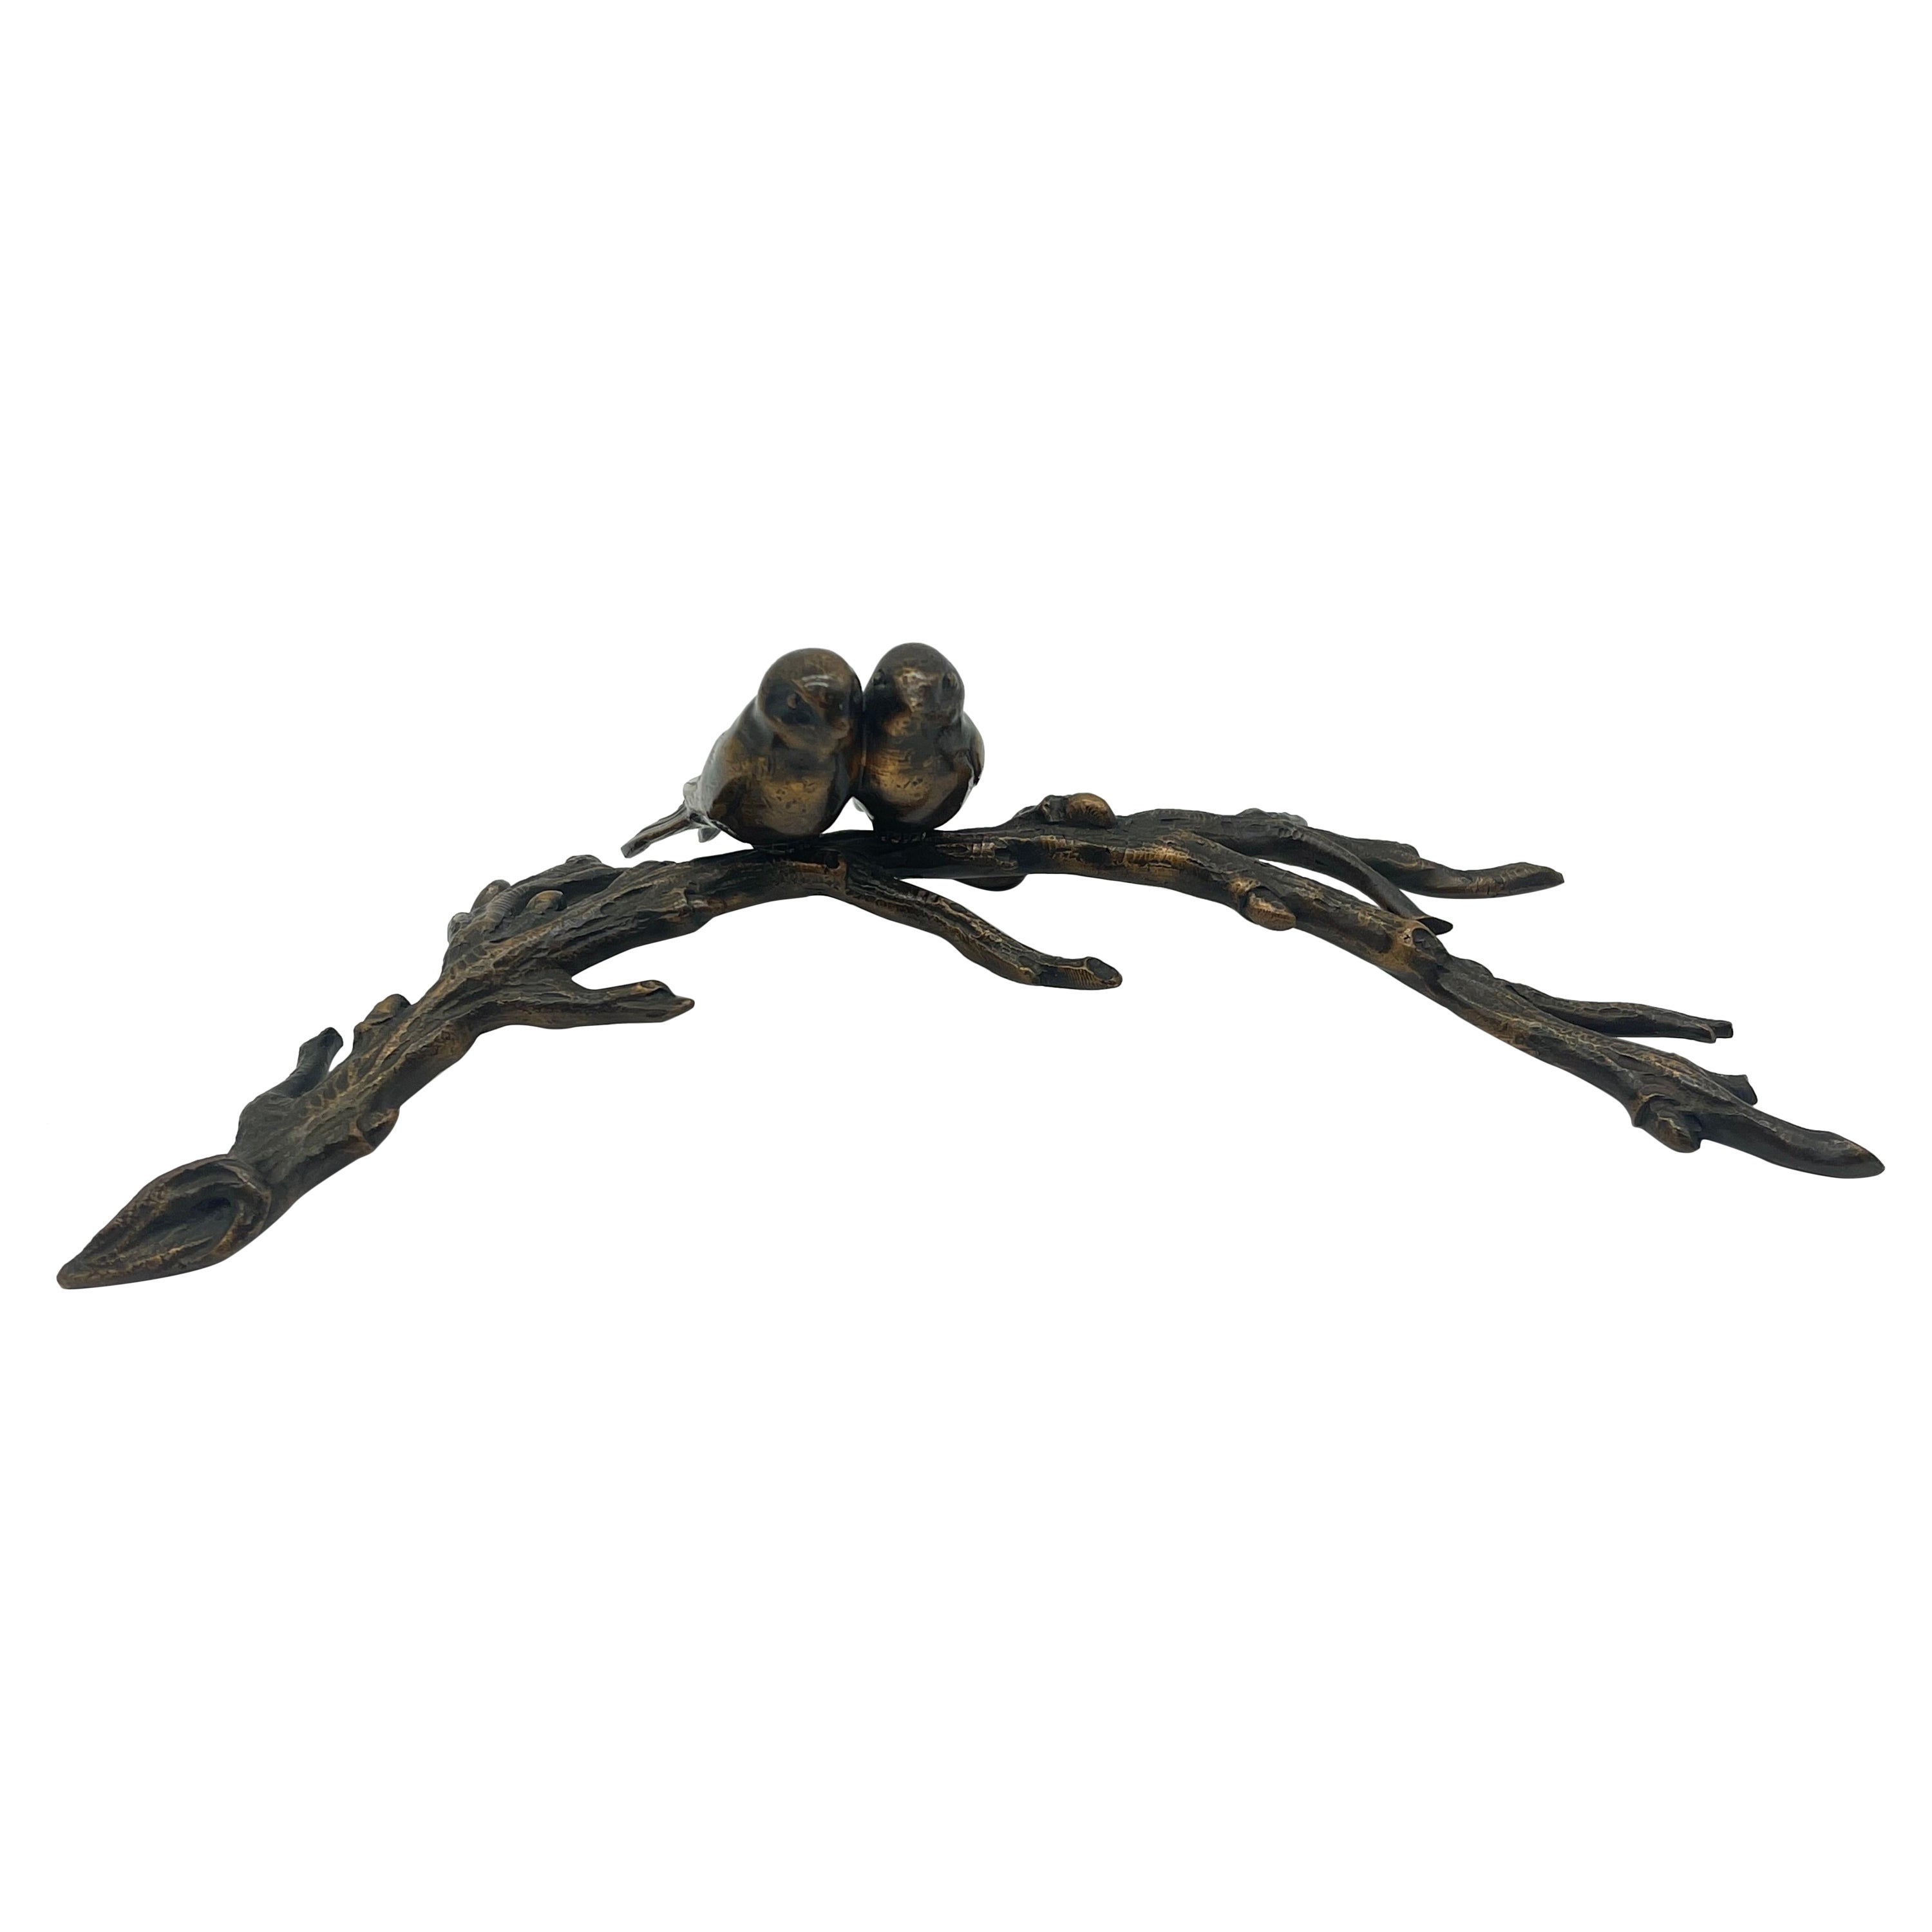 2 birds sitting on a branch Bronze Sculpture / Figure probably Germany